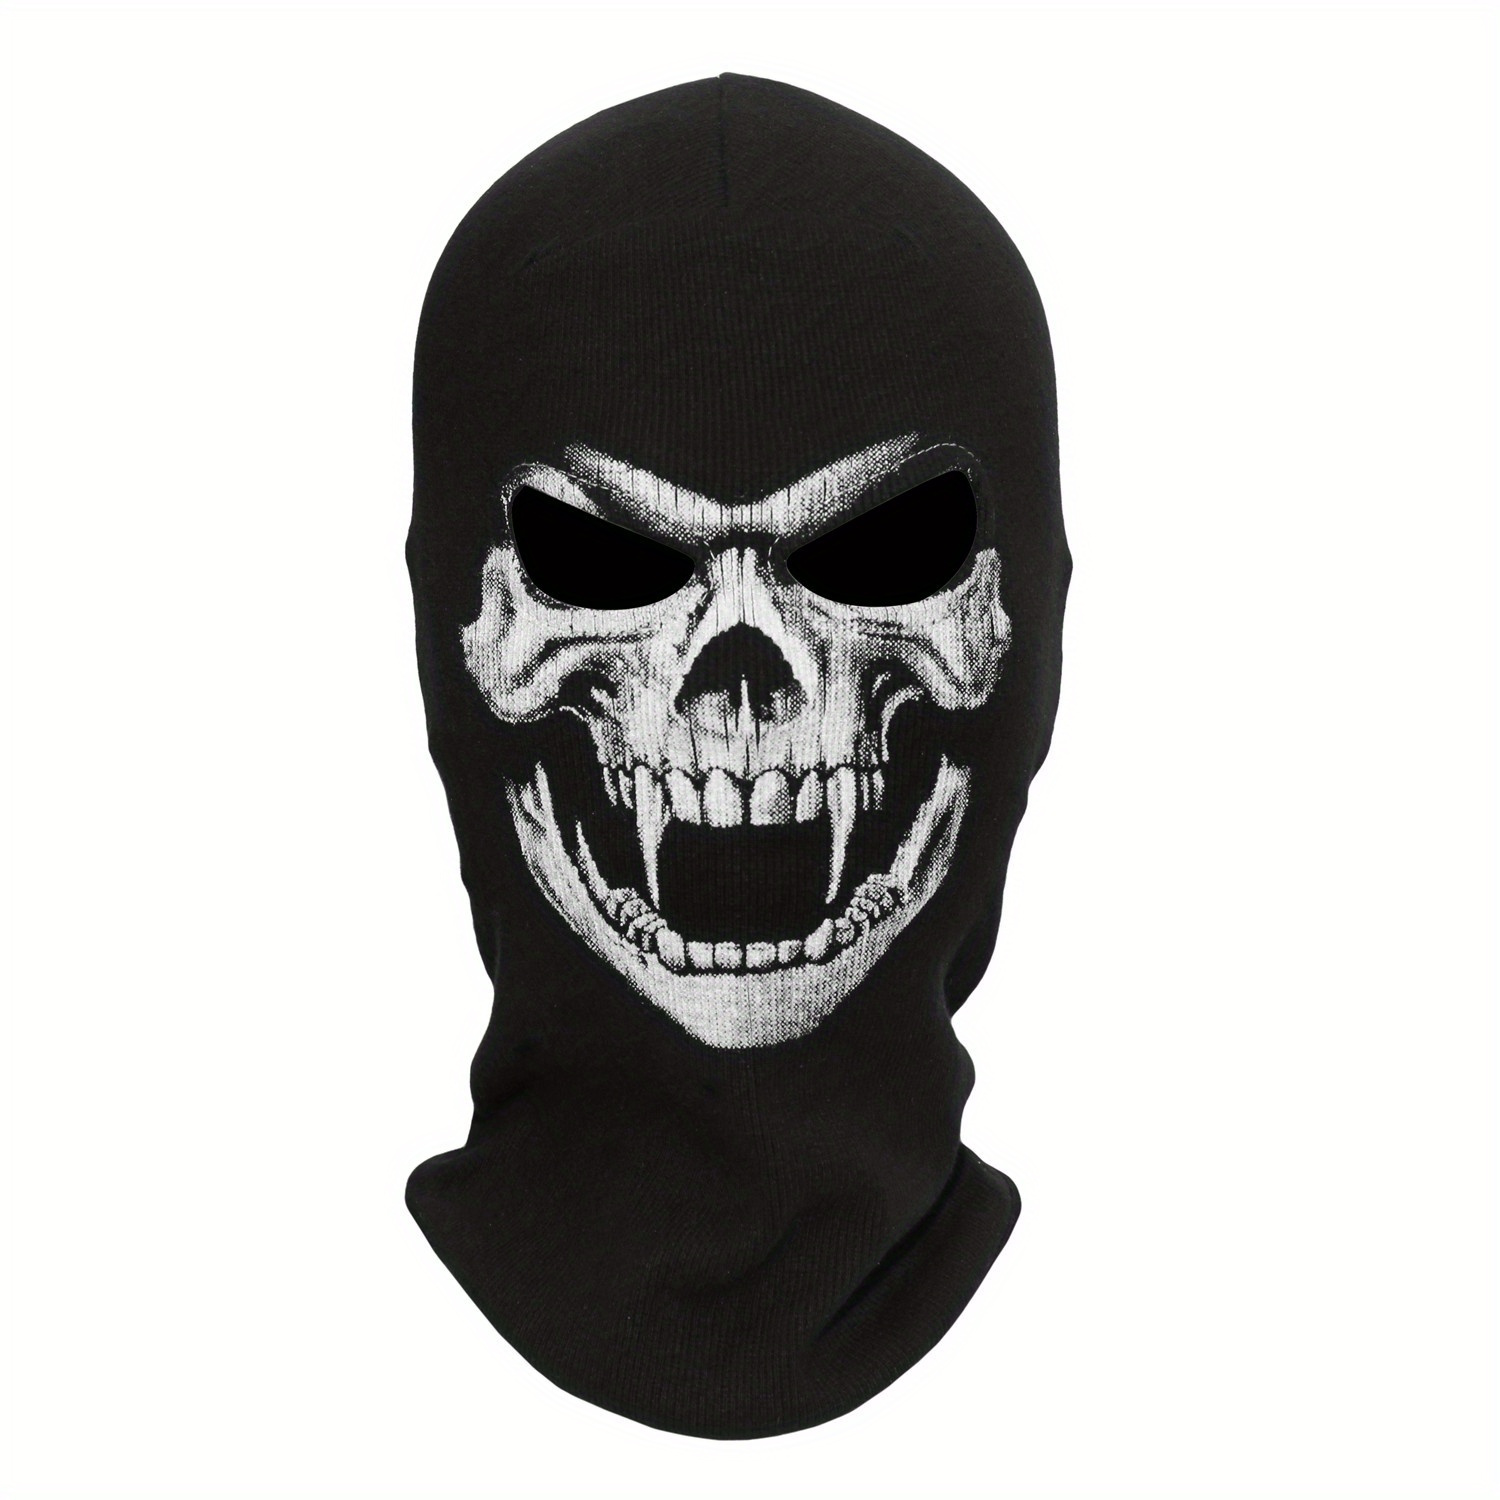 Call Of Duty Ghost Mask Adult Balaclava Hat + Skull Full Face Mask